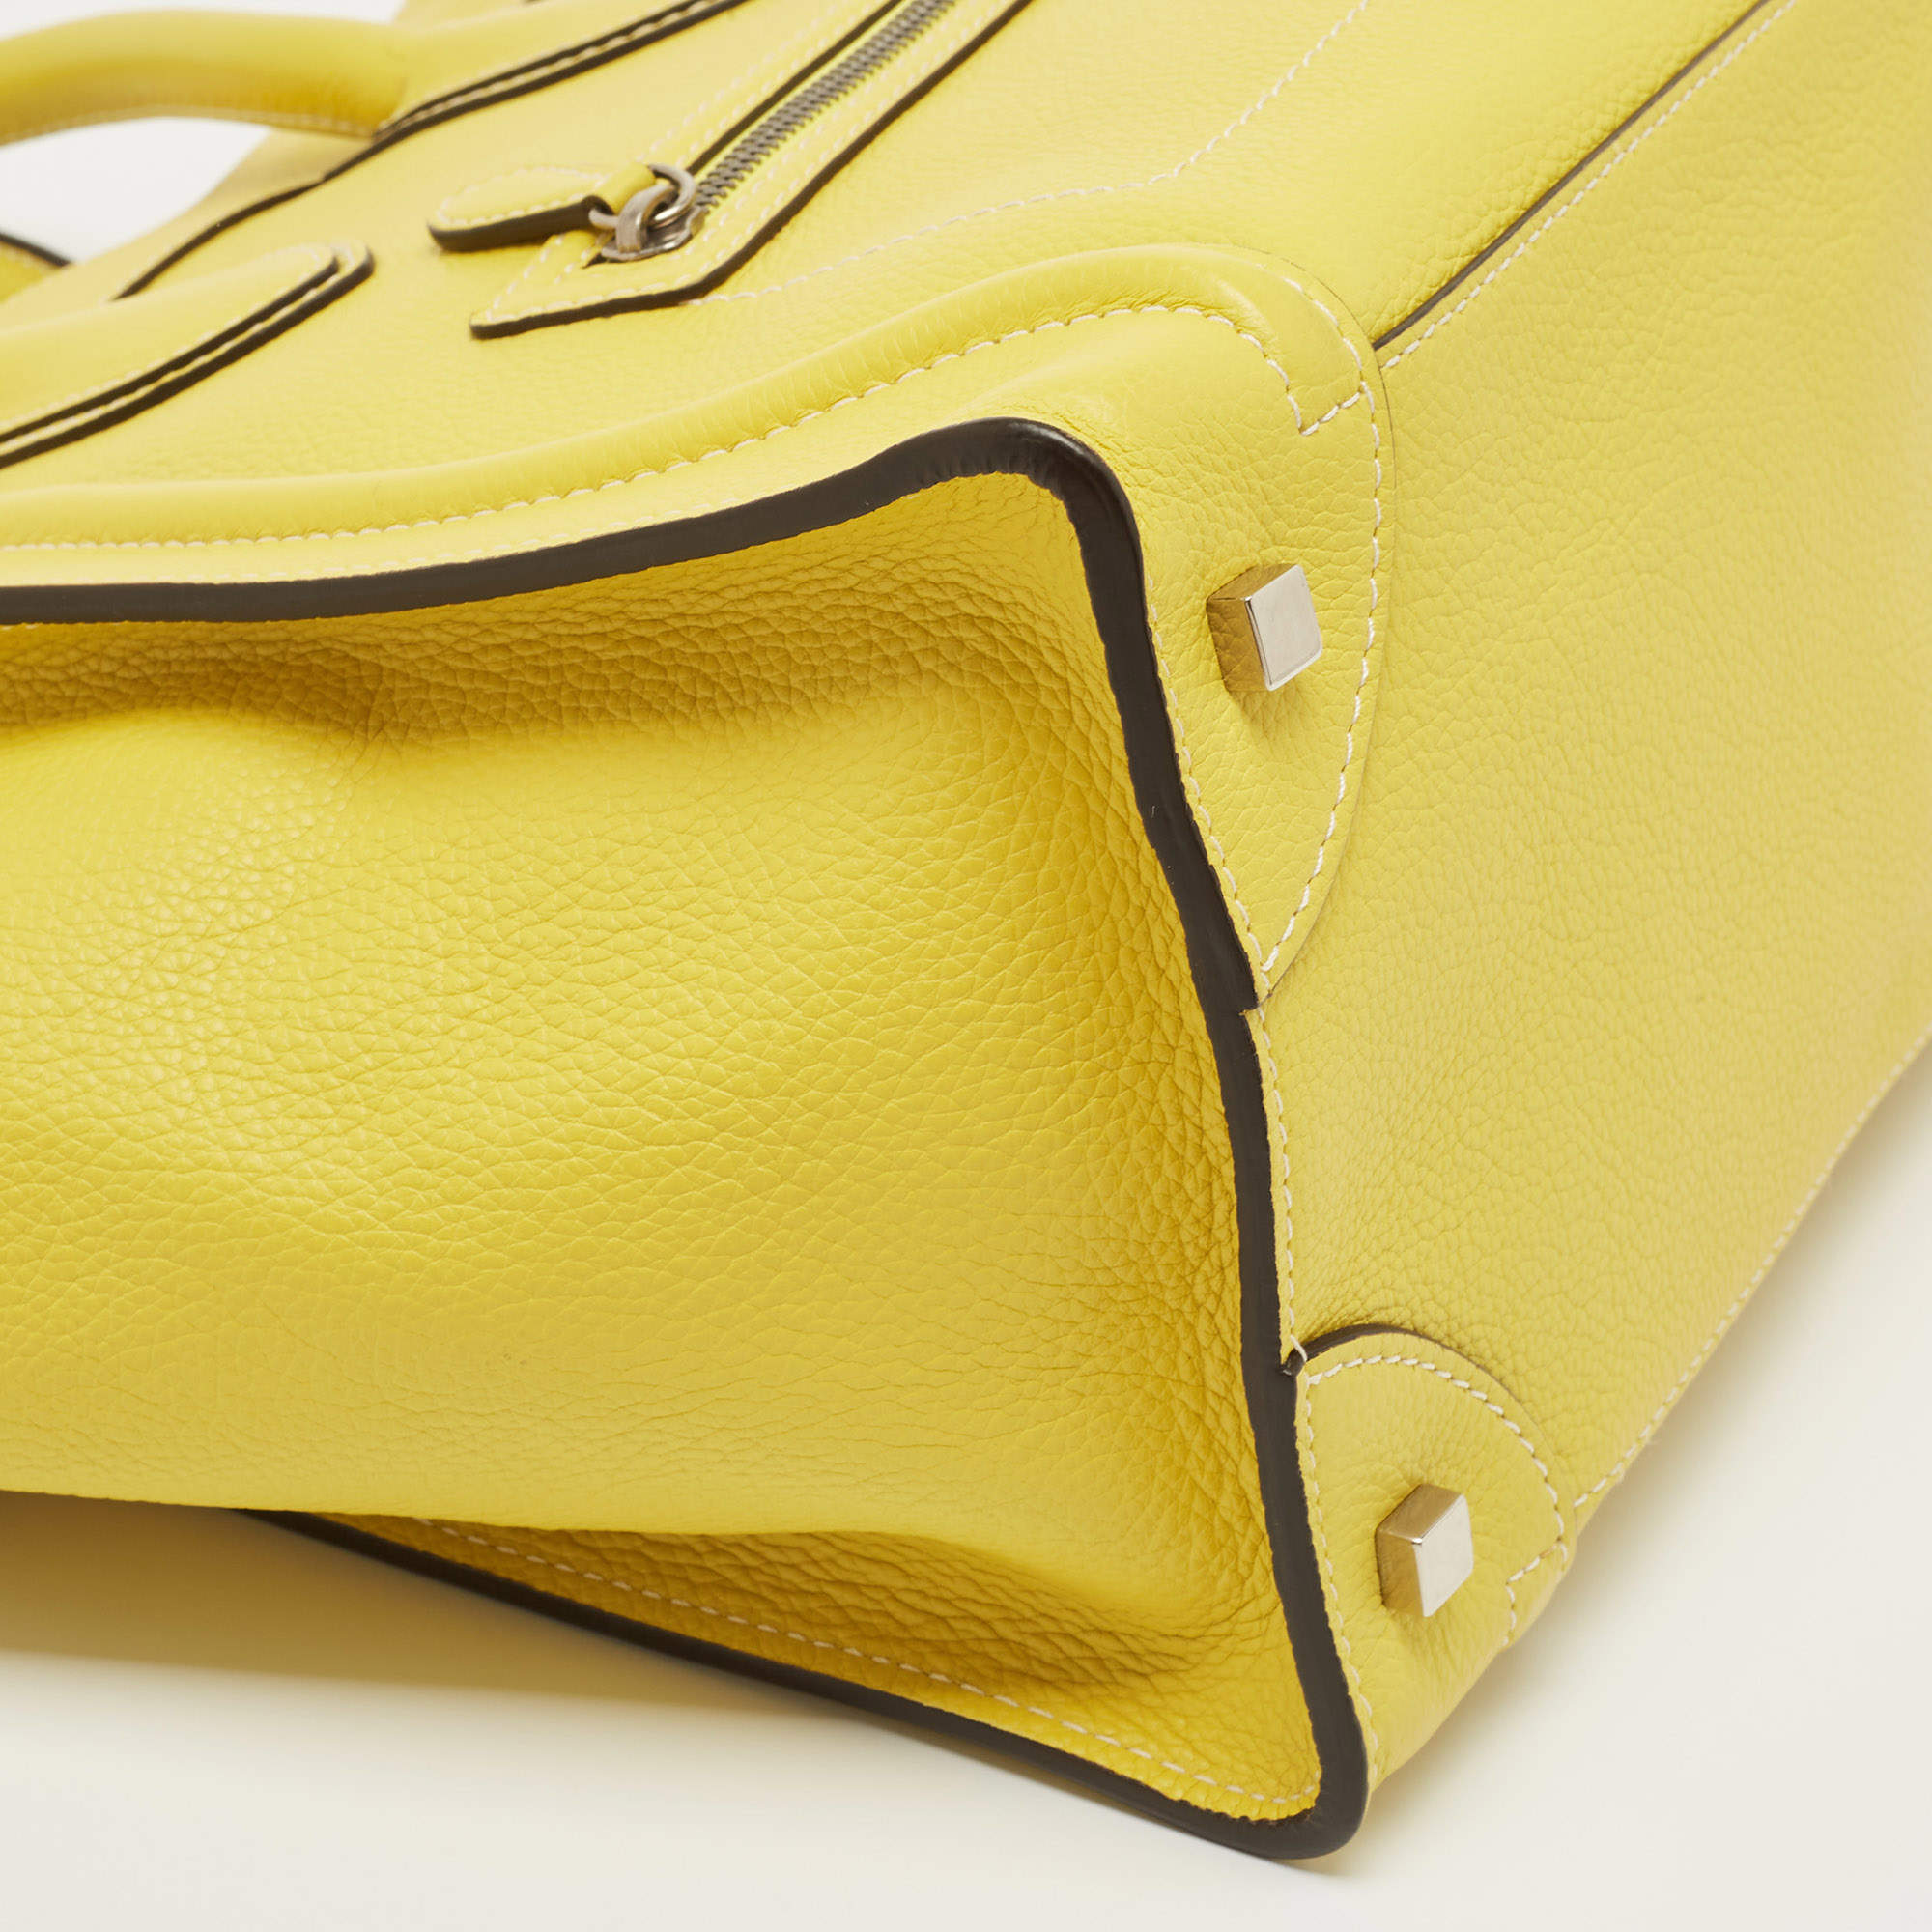 Celine Large Leather-Trim Tote Women's Yellow